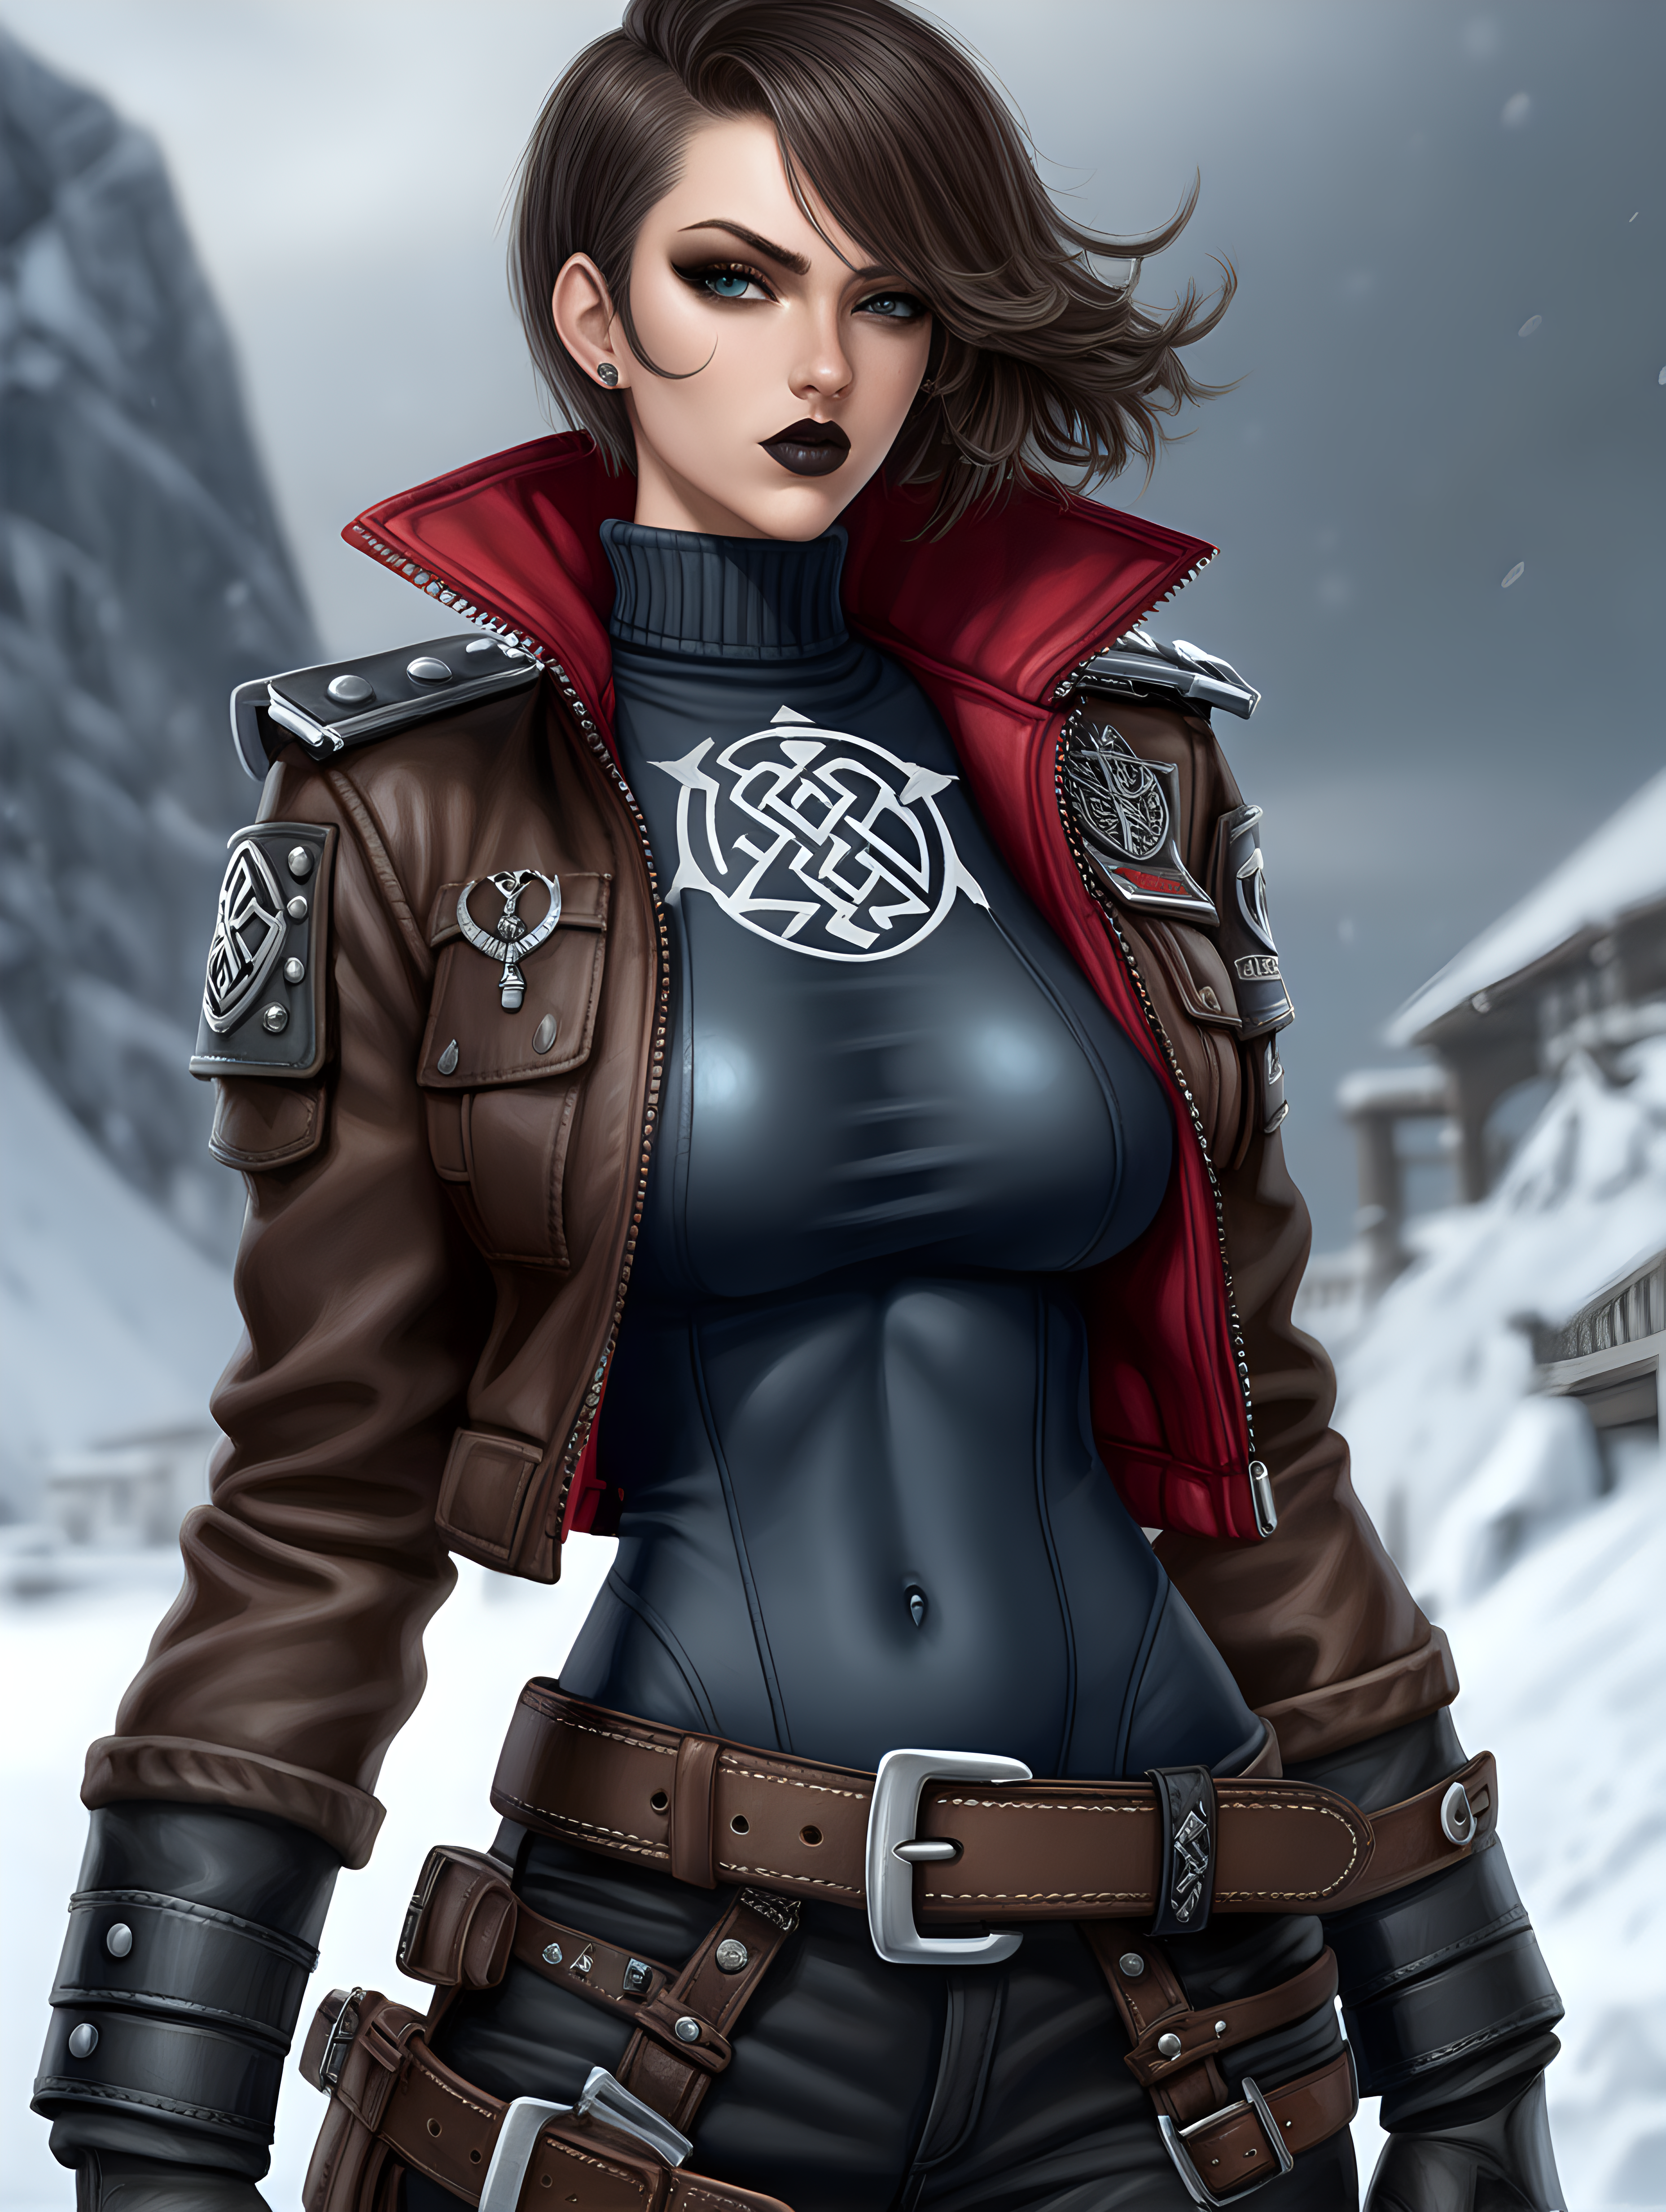 Warhammer 40K young busty Commissar woman She has